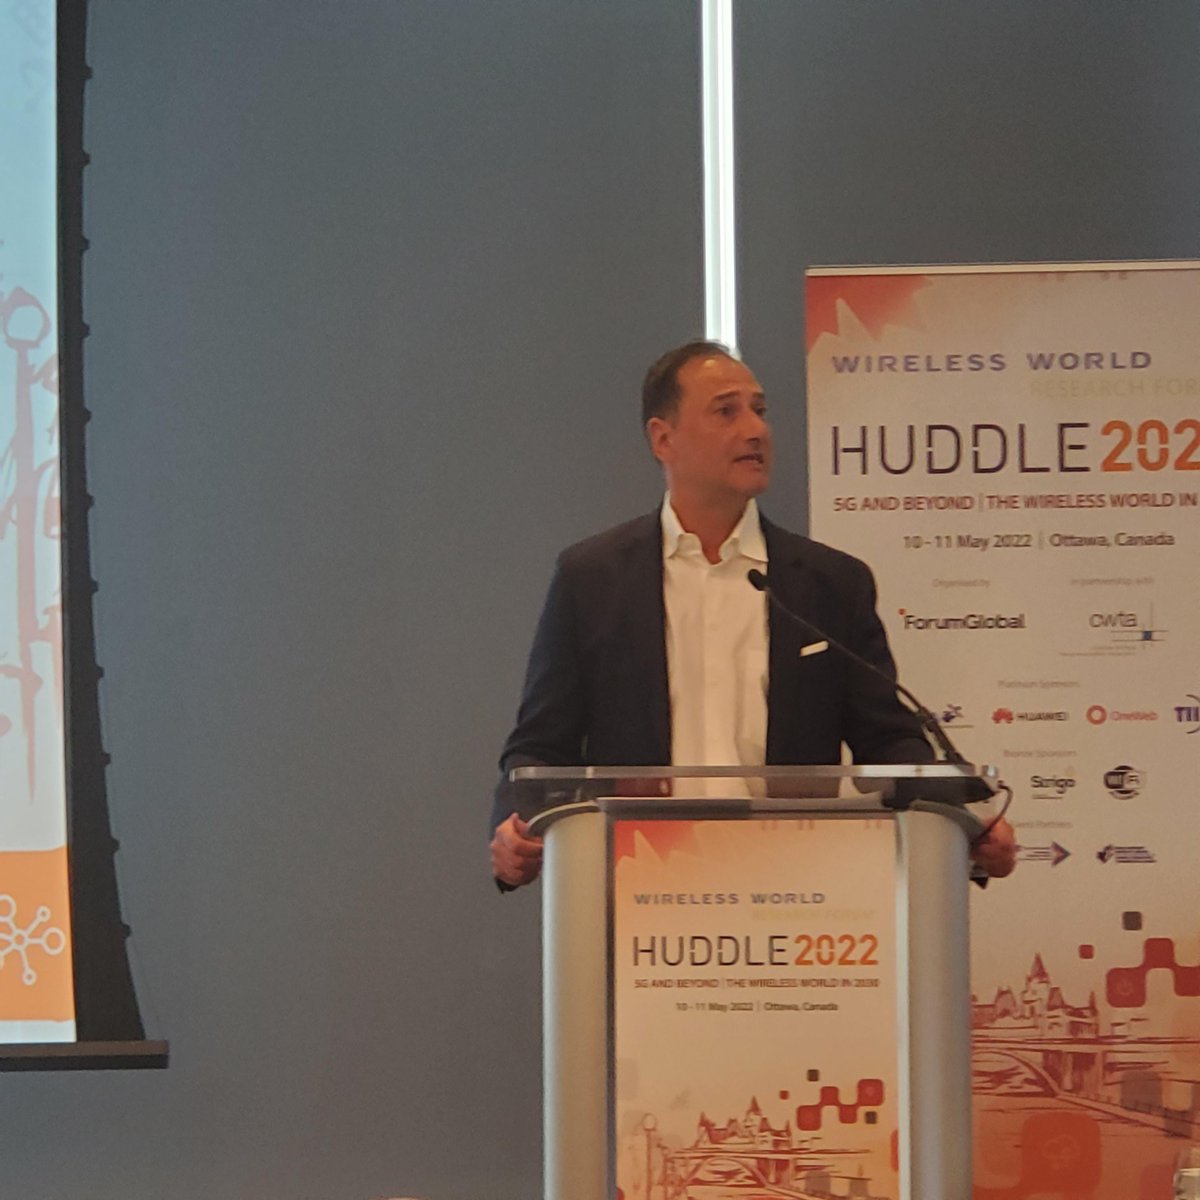 test Twitter Media - #ICYMI: Read about CWTA President and CEO @RobertGhiz's remarks as opening speaker of the 2022 @WWRF Huddle conference this week, discussing the significant role #5G will play in furthering Canada's economic growth and prosperity in the years to come: https://t.co/wjUf4z2ECv https://t.co/xpbzq0rZNc